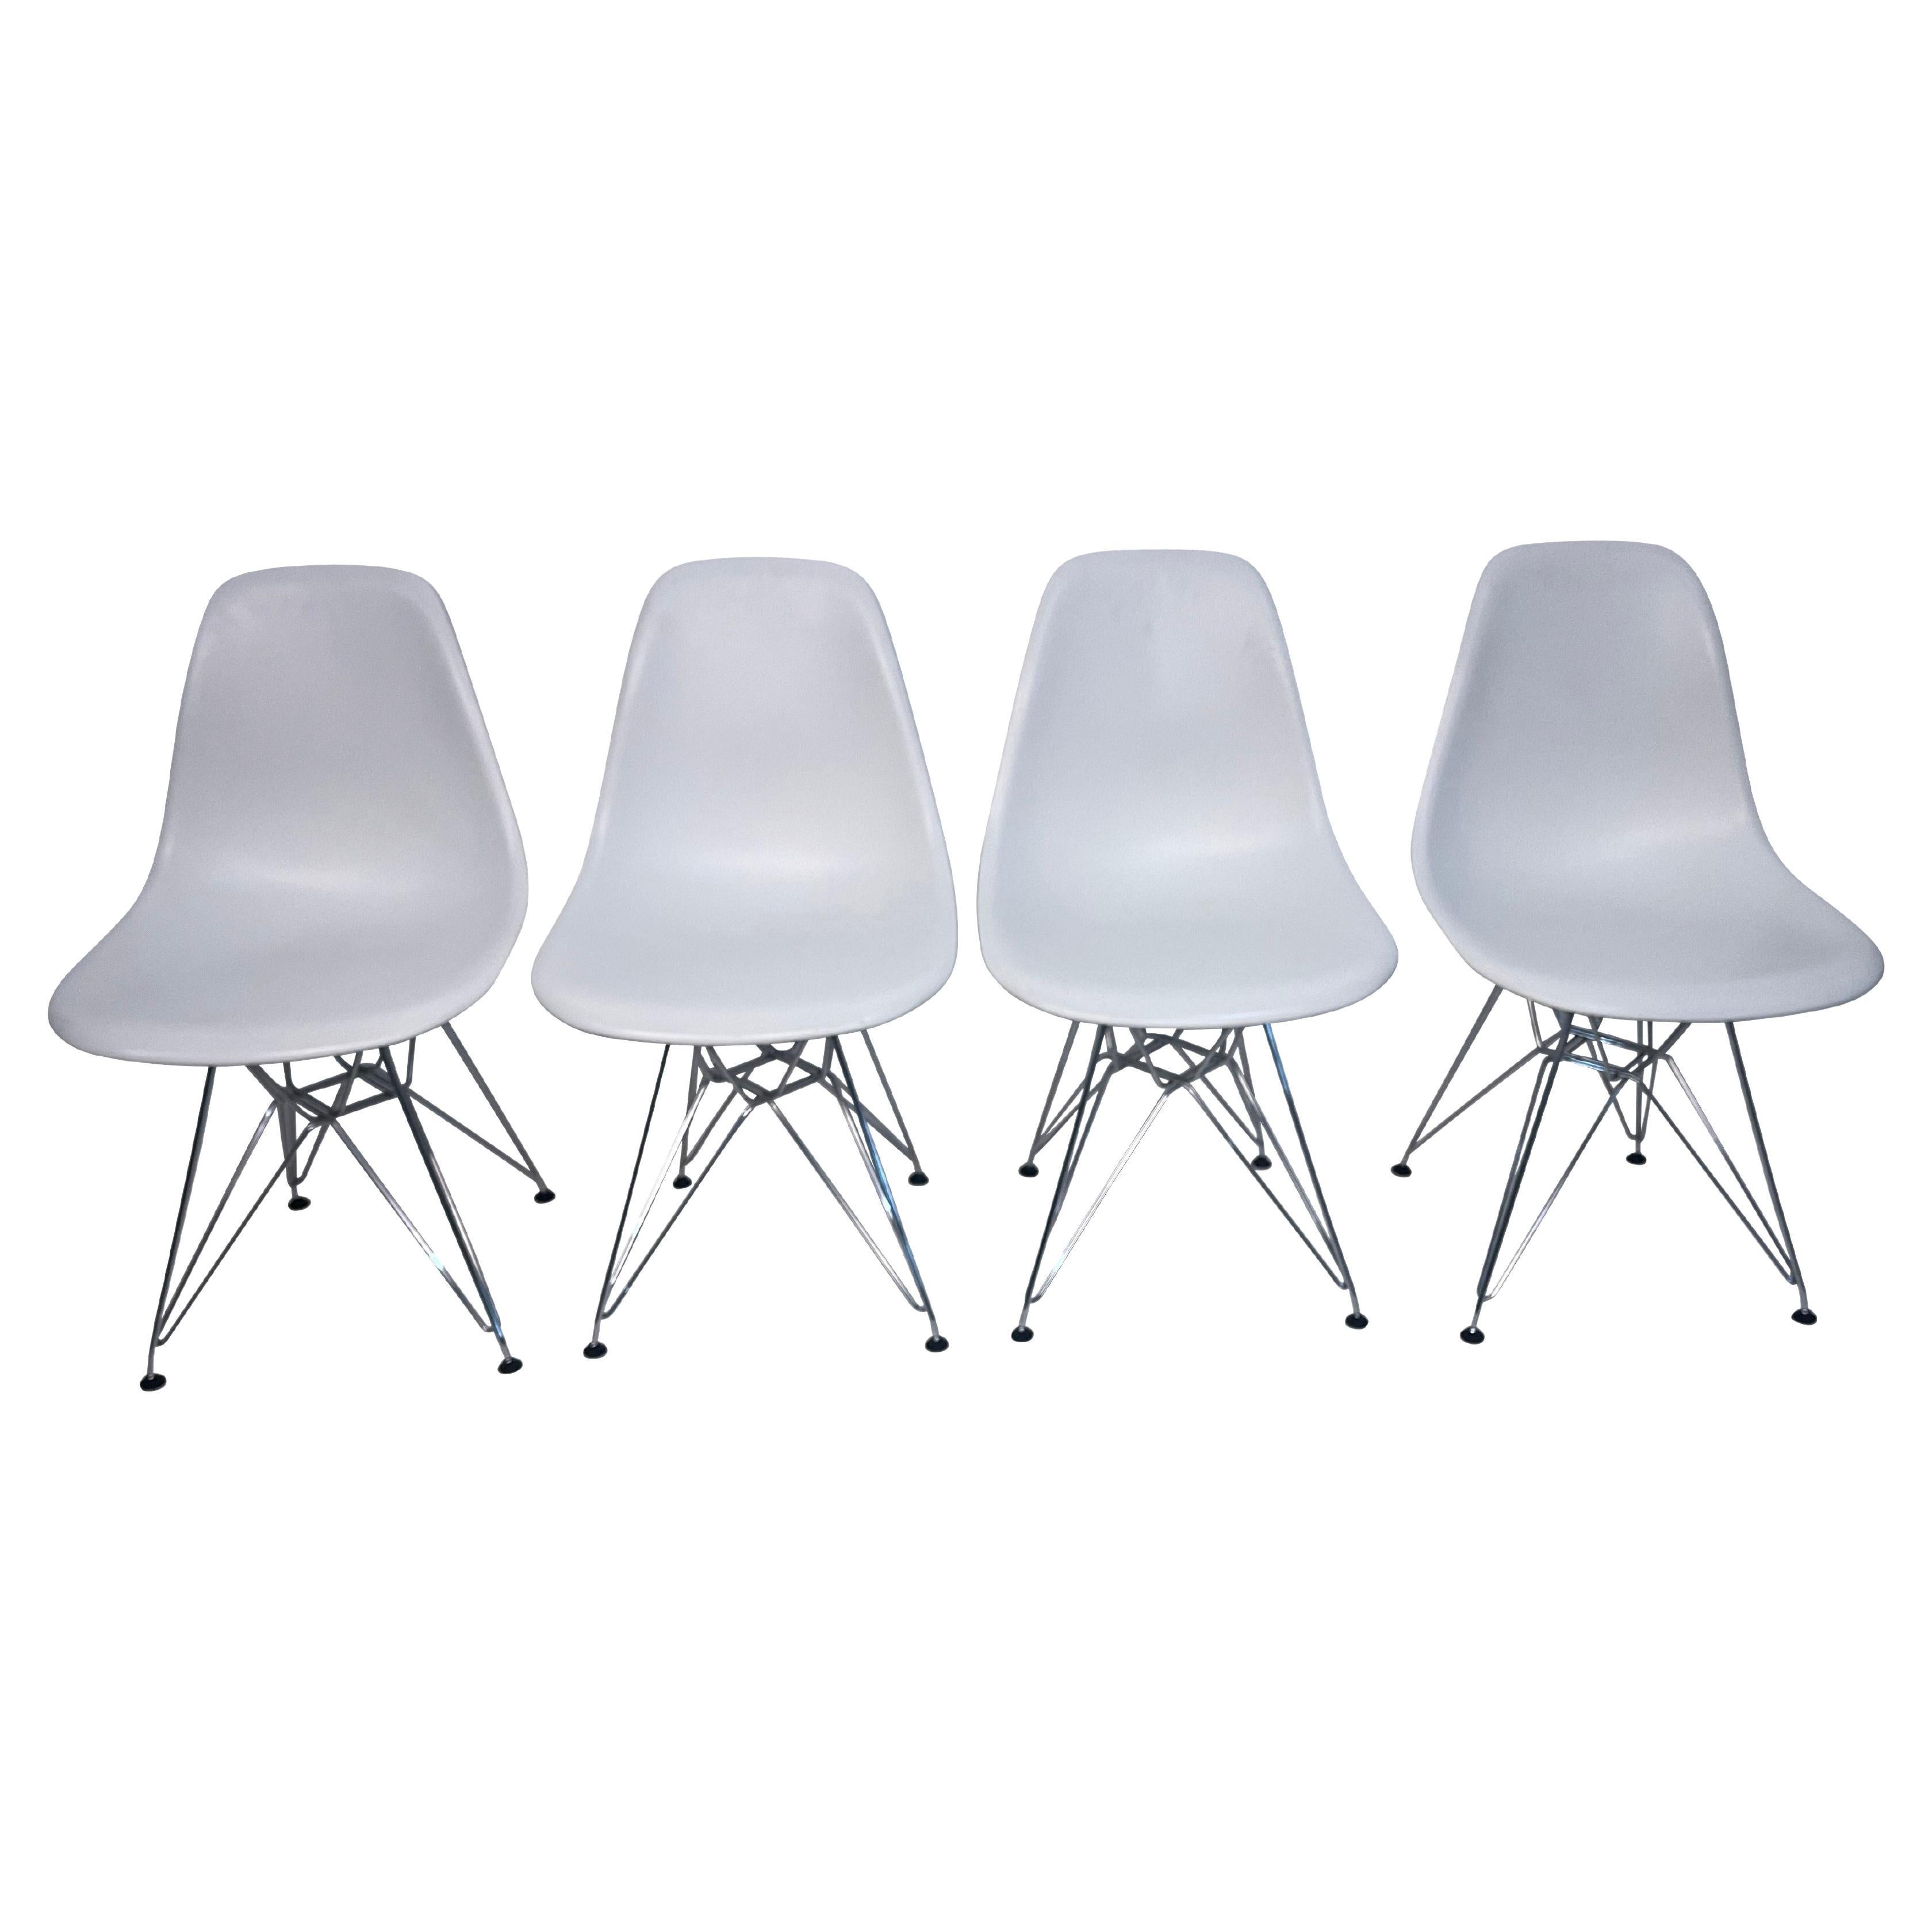 Eames For Knoll Four Molded White Plastic Chairs with Eiffel Tower Bases